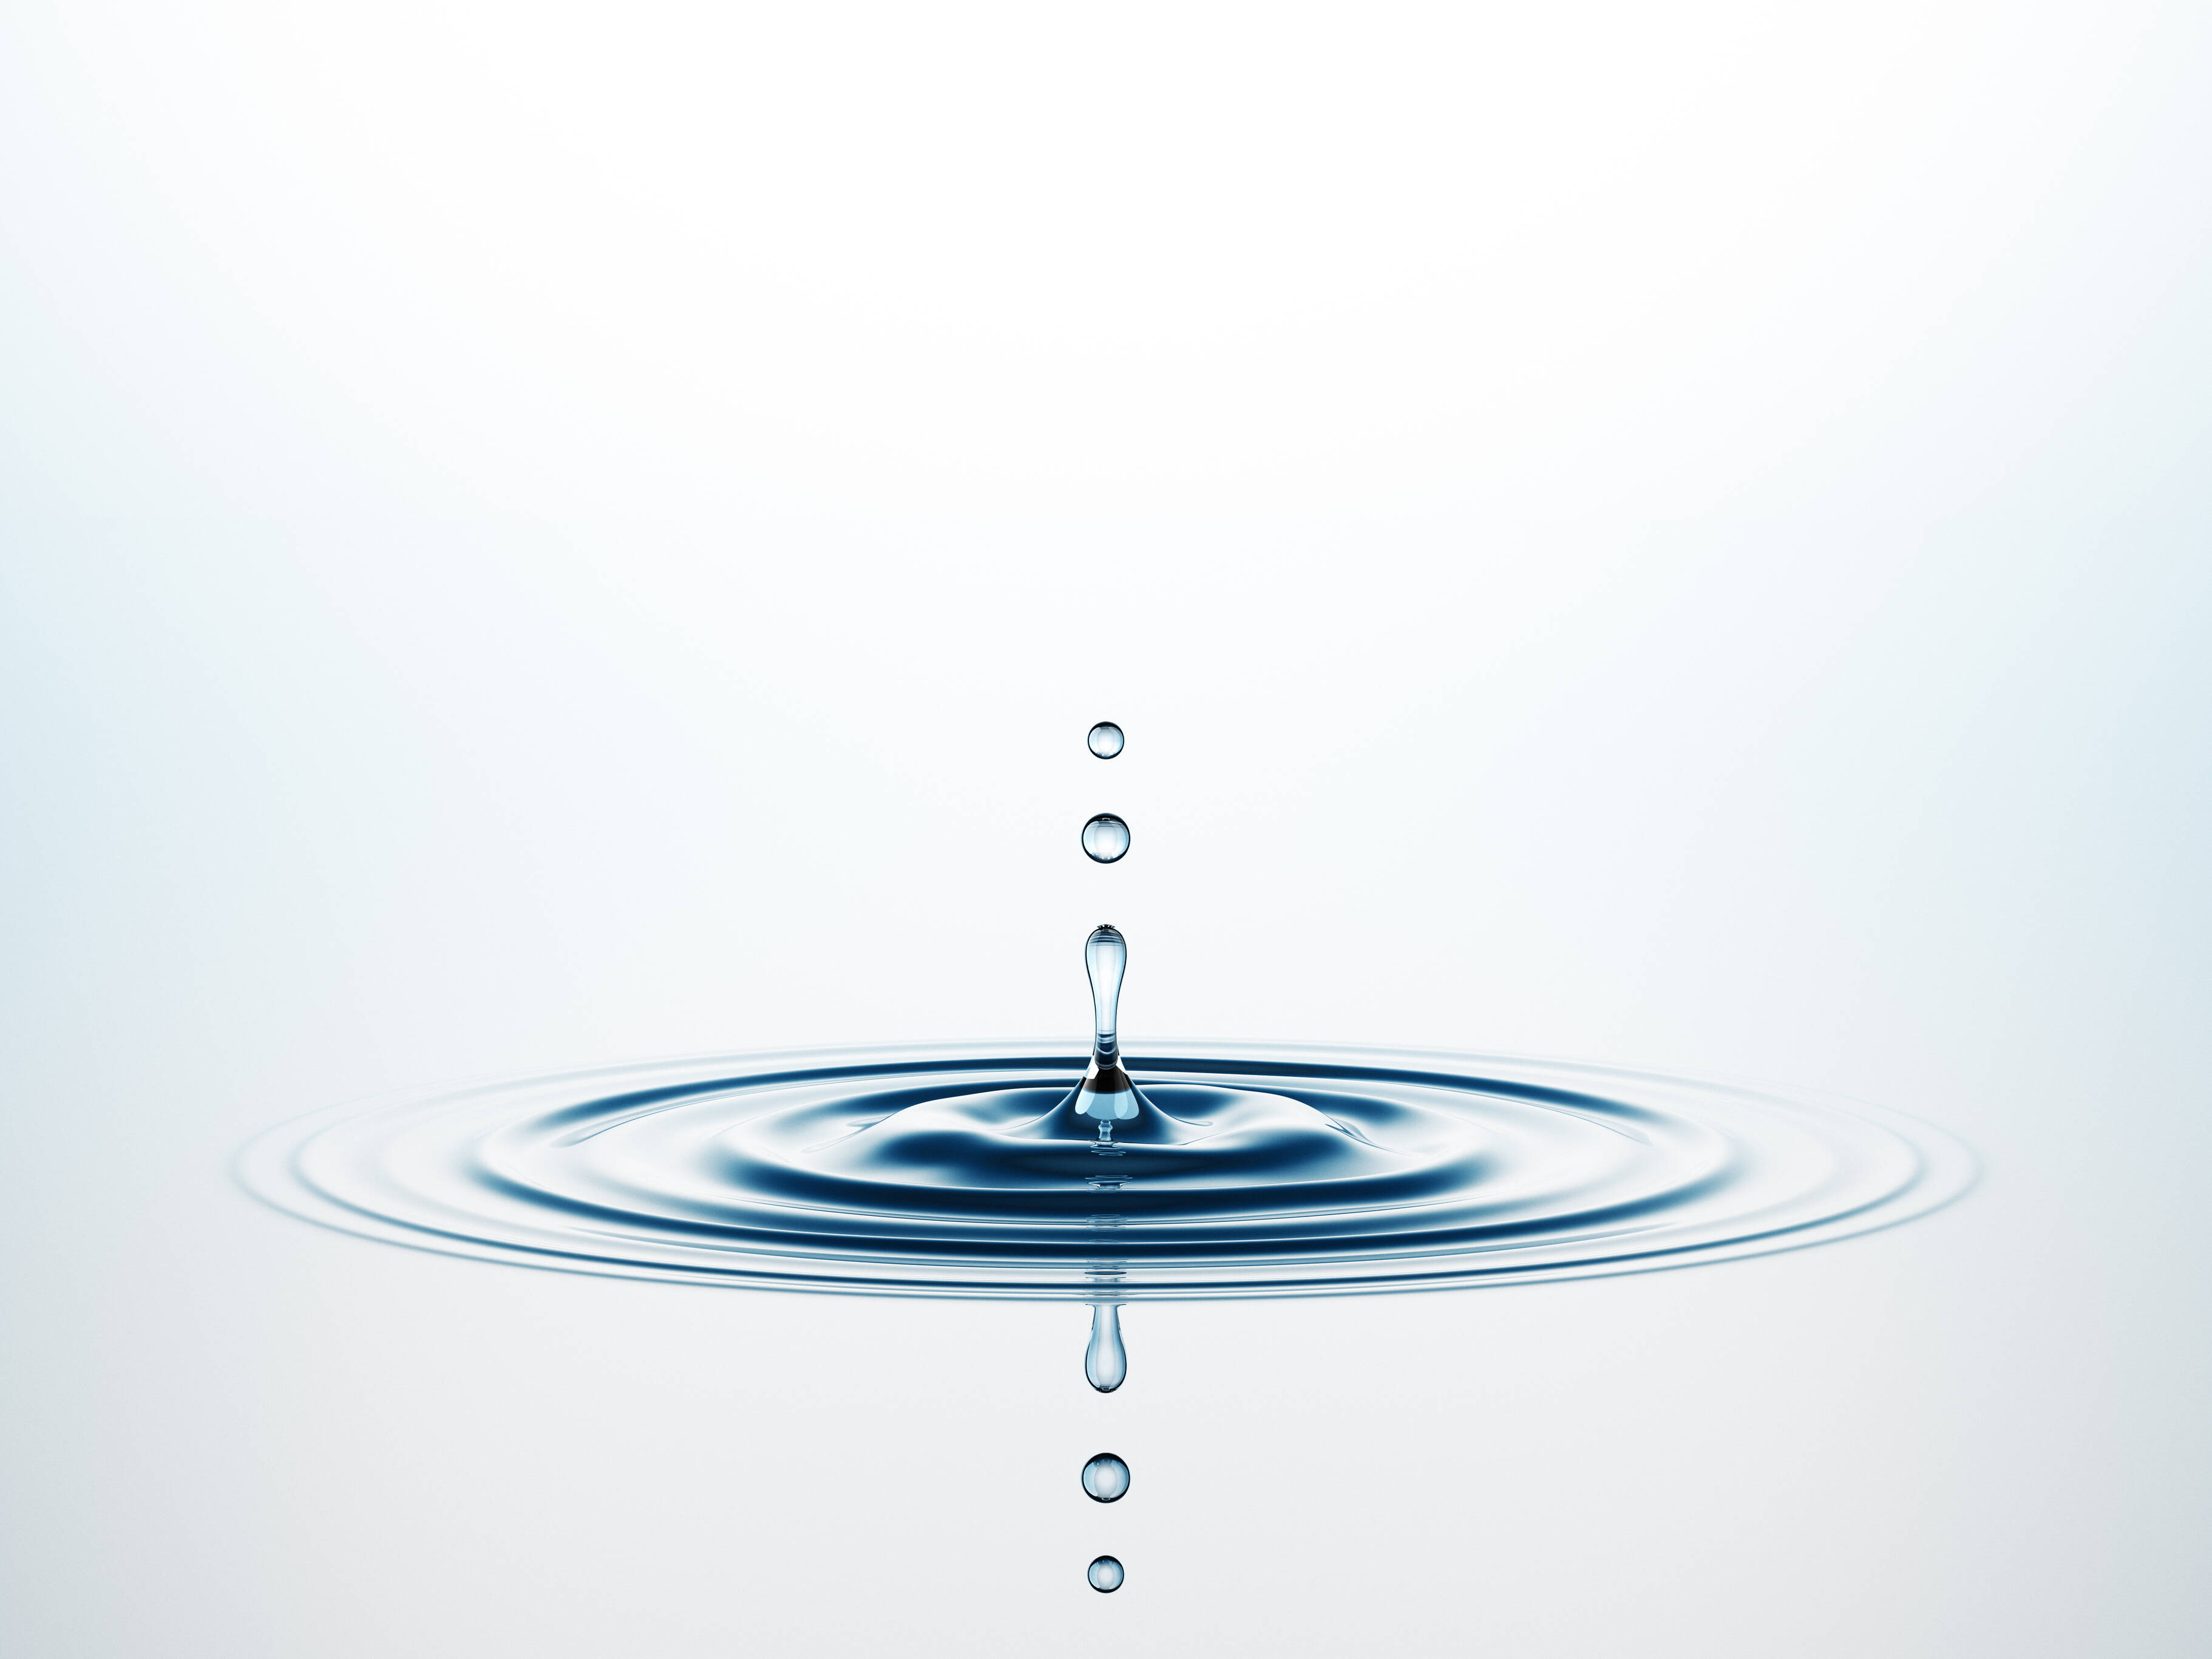 Survey shows big businesses are engaging with water market